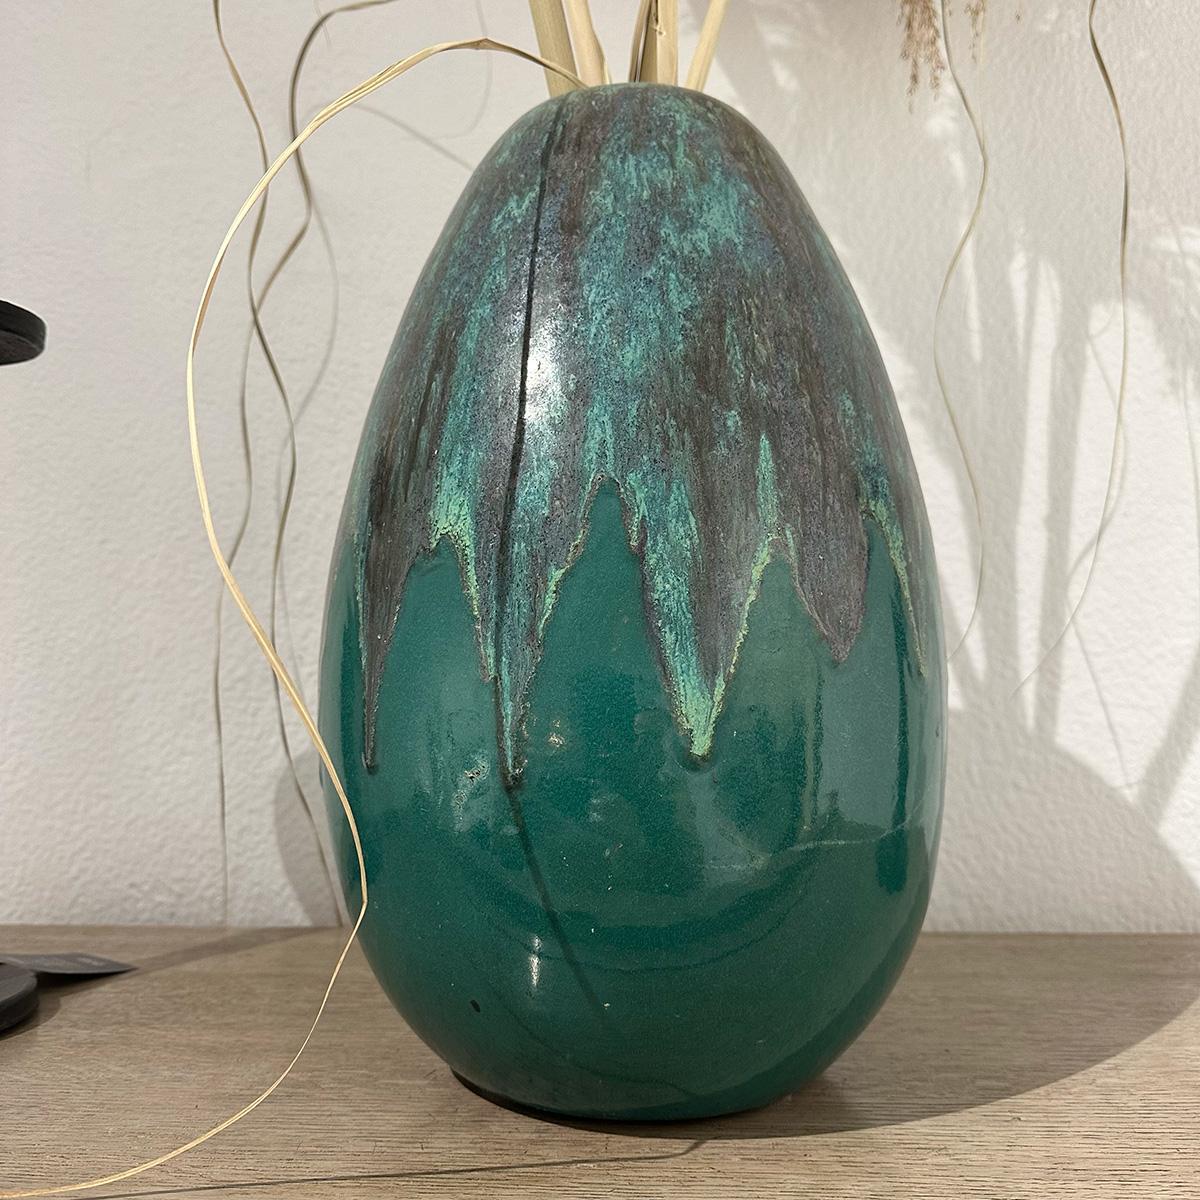 A large glazed ceramic green vase by Atelier Primavera, hailing from the 1950s, is a masterpiece that epitomizes mid-century ceramic artistry. Crafted by the prestigious Atelier Primavera, a renowned French workshop that played a pivotal role in